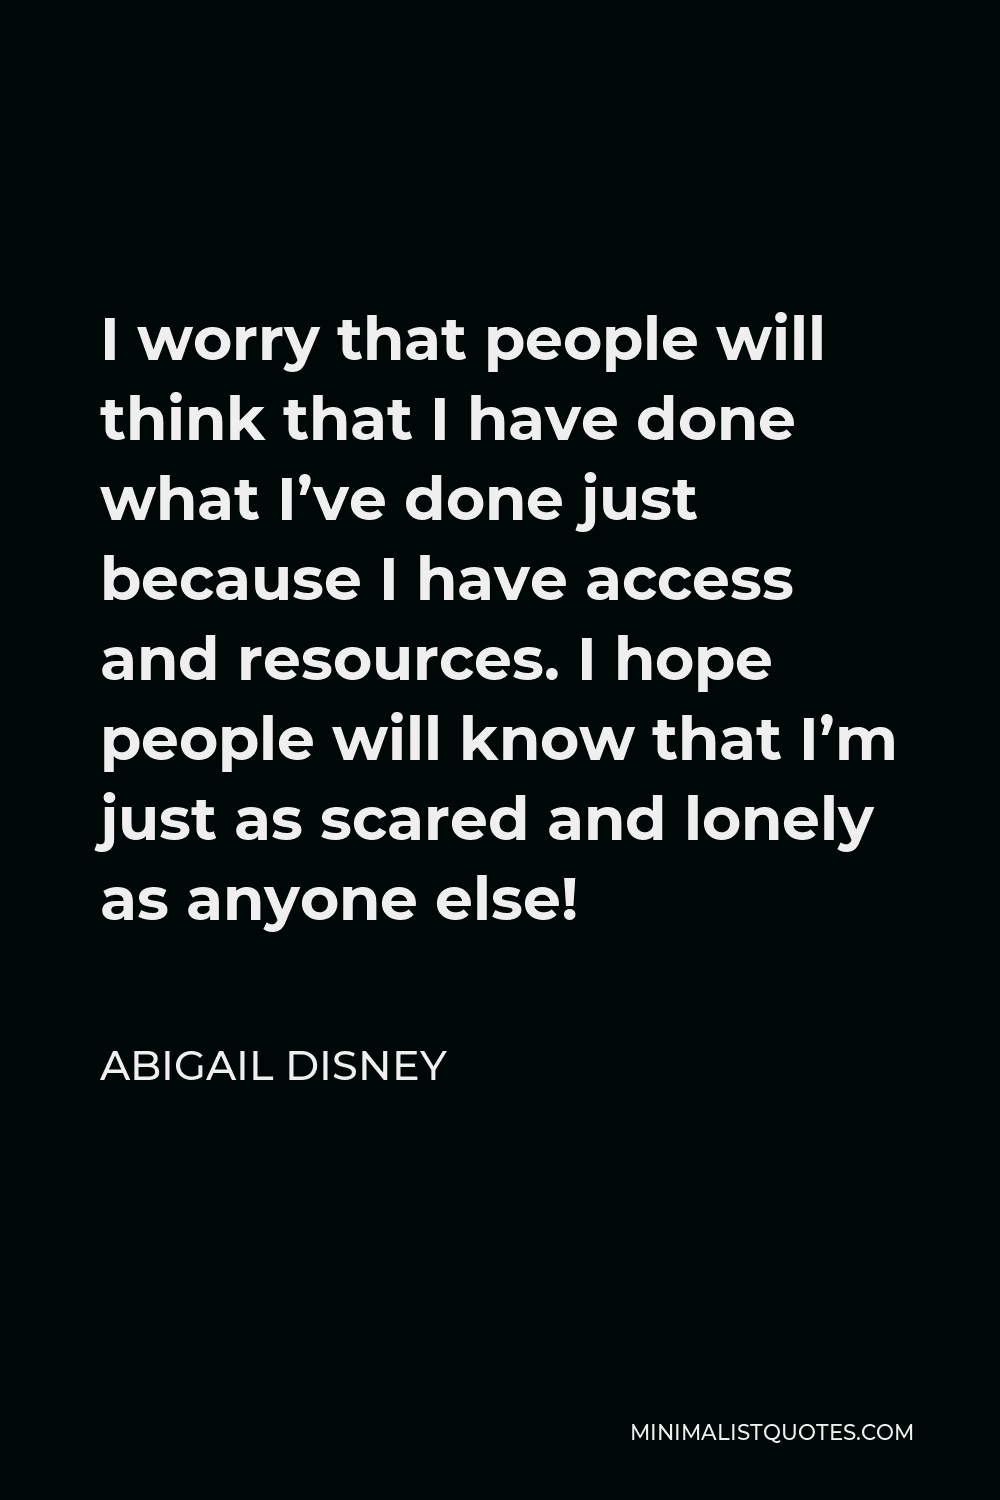 Abigail Disney Quote - I worry that people will think that I have done what I’ve done just because I have access and resources. I hope people will know that I’m just as scared and lonely as anyone else!